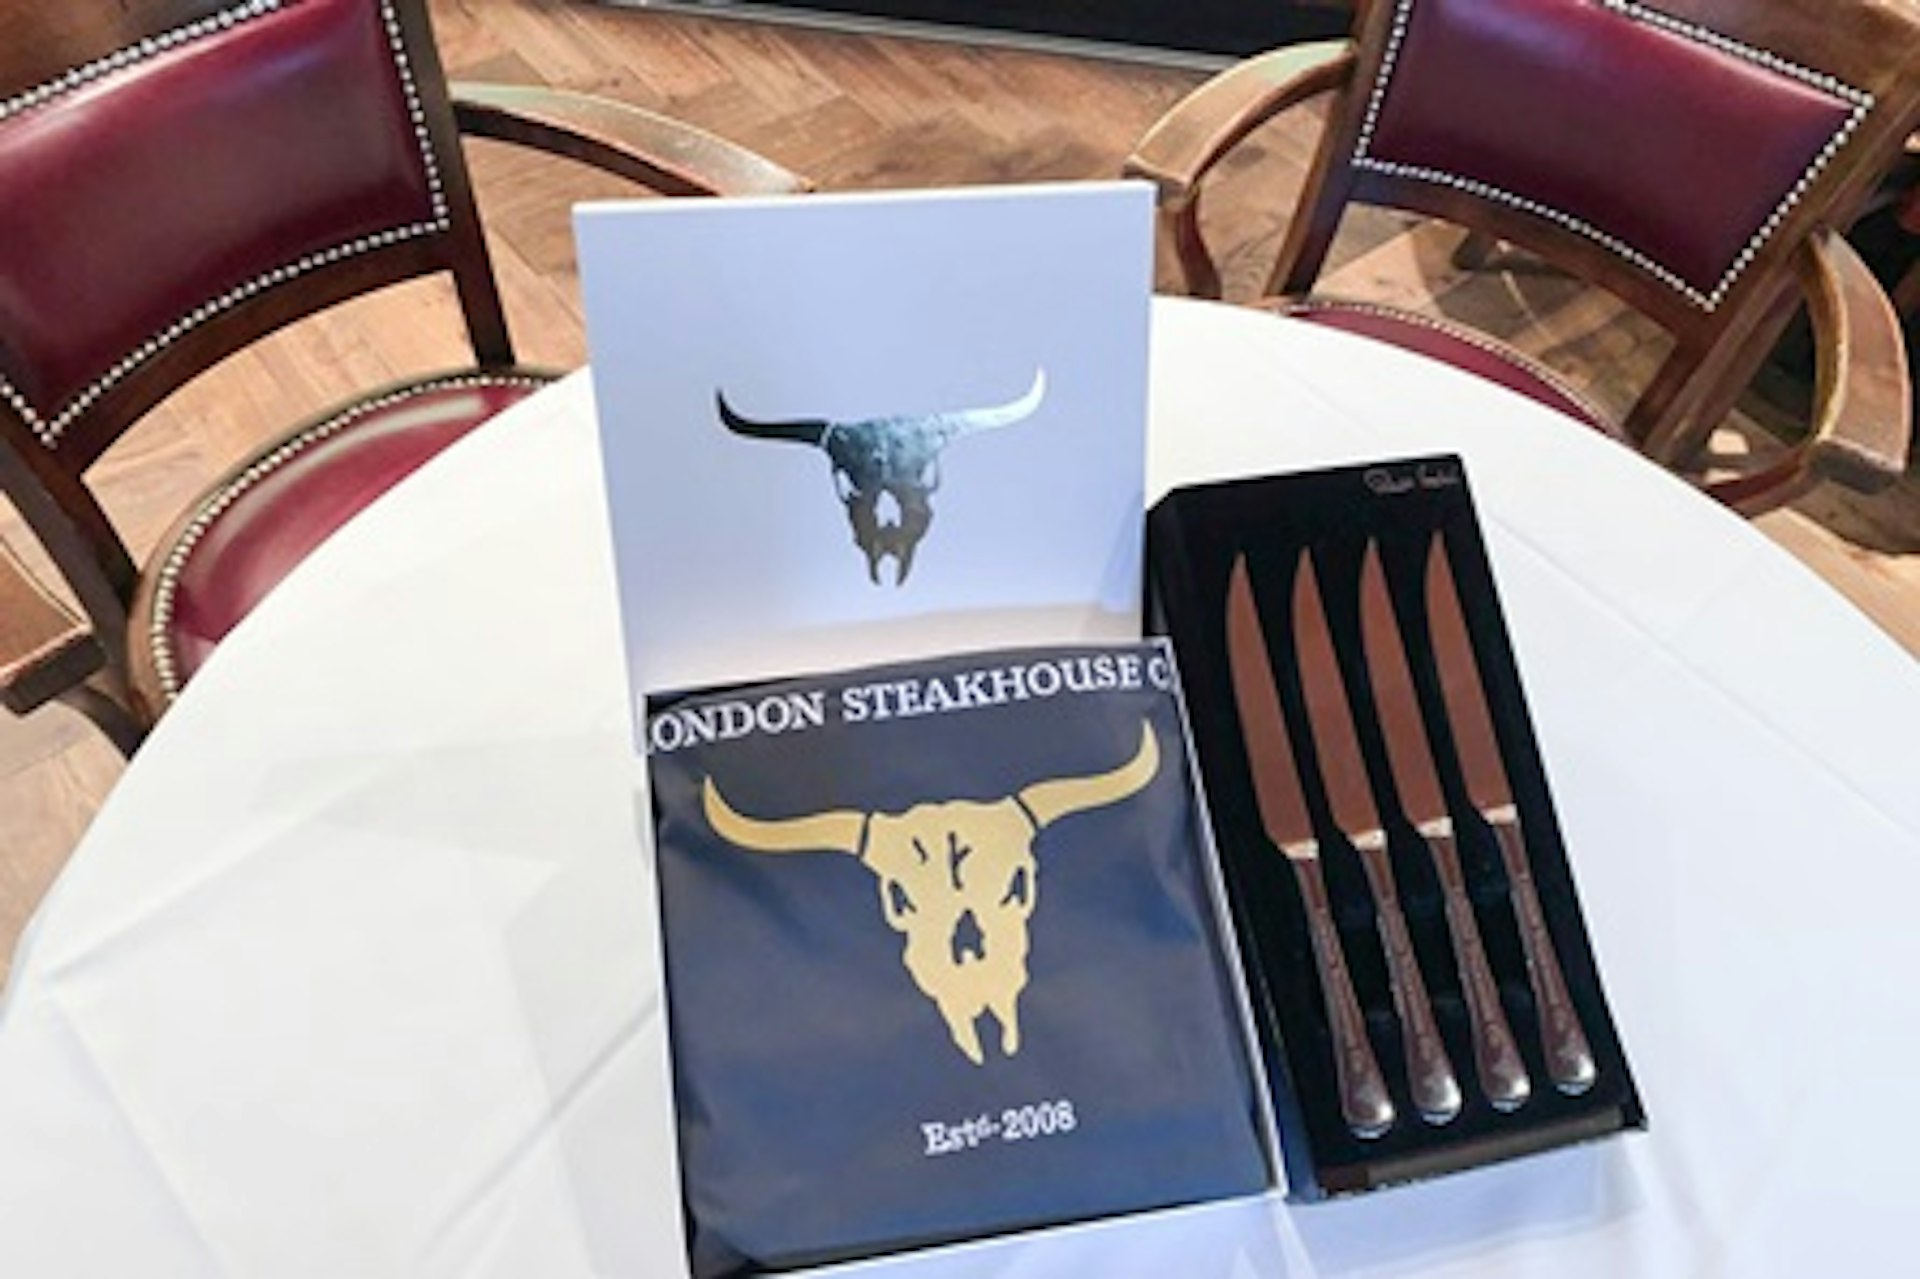 Set of Steak Knives with Apron and Three Course Dining Experience and Cocktail for Two at Marco Pierre White's London Steakhouse Co 2